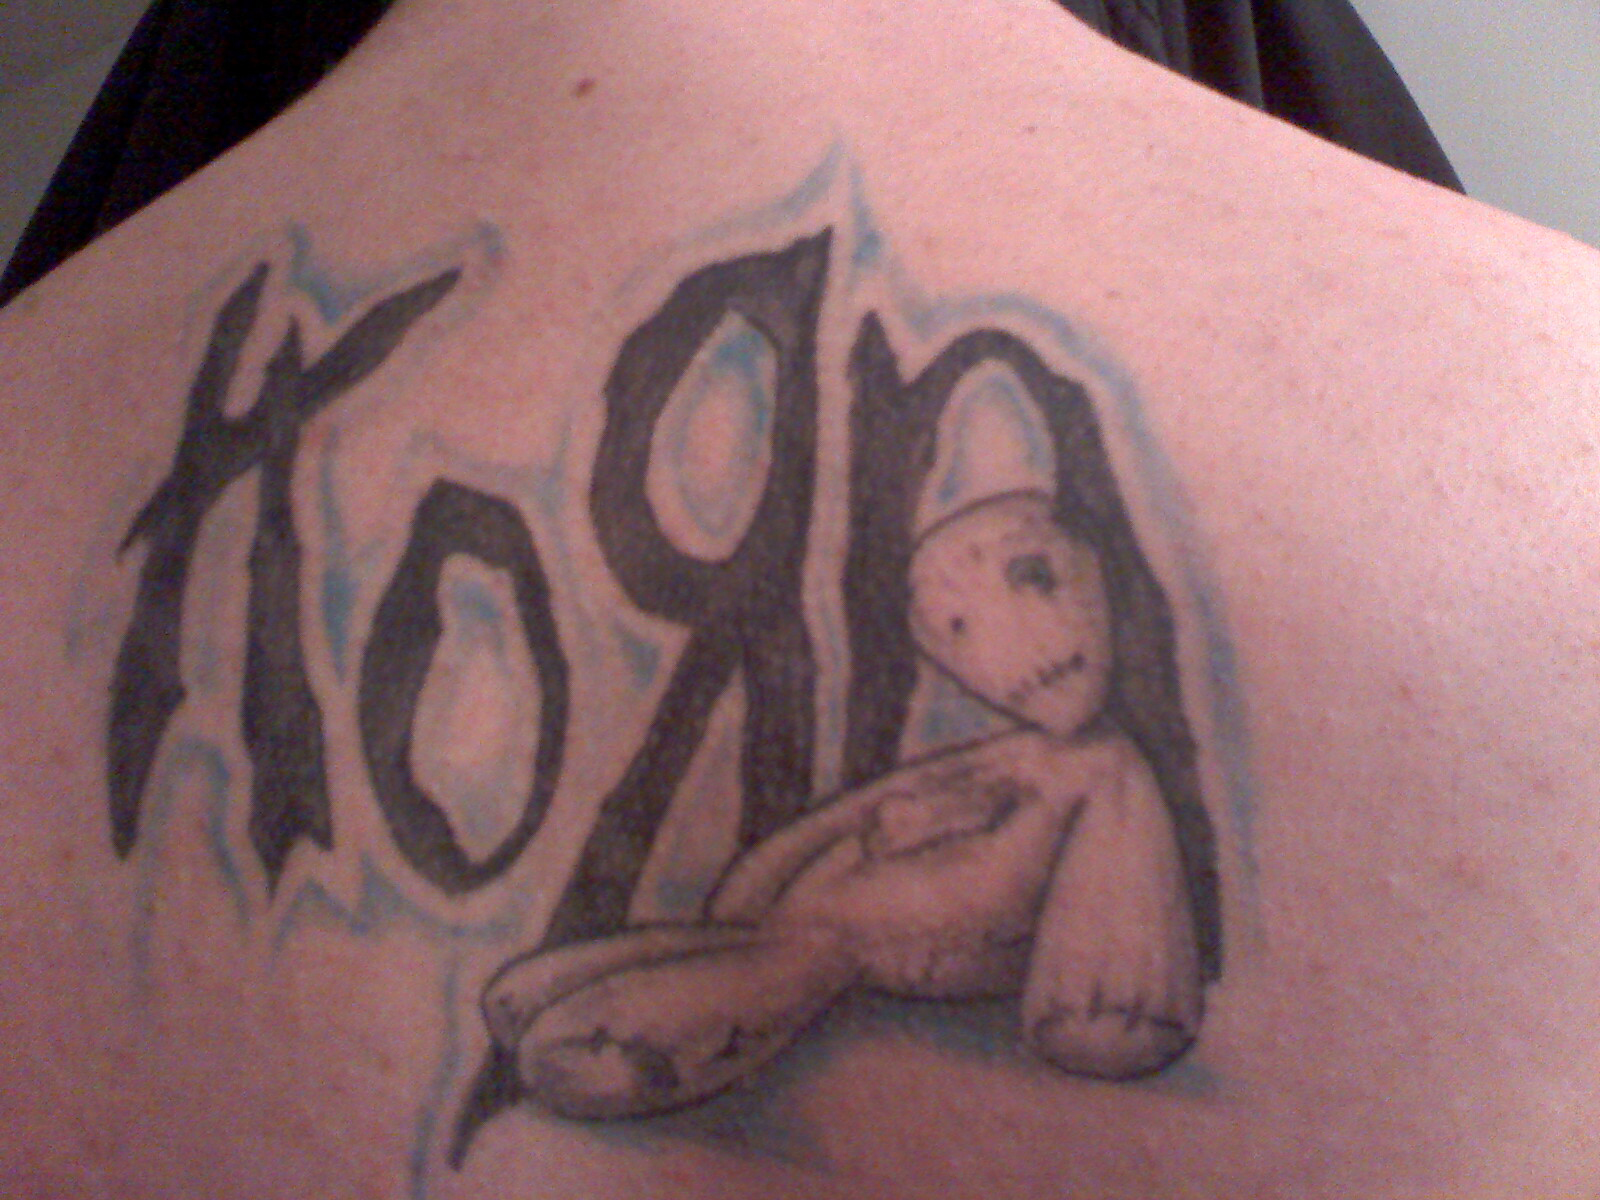 Saw the band tattoo gallery and decided to upload mine. All hand drawn with no tracing involved. Gonna eventually do something from each KoRn album on my back.